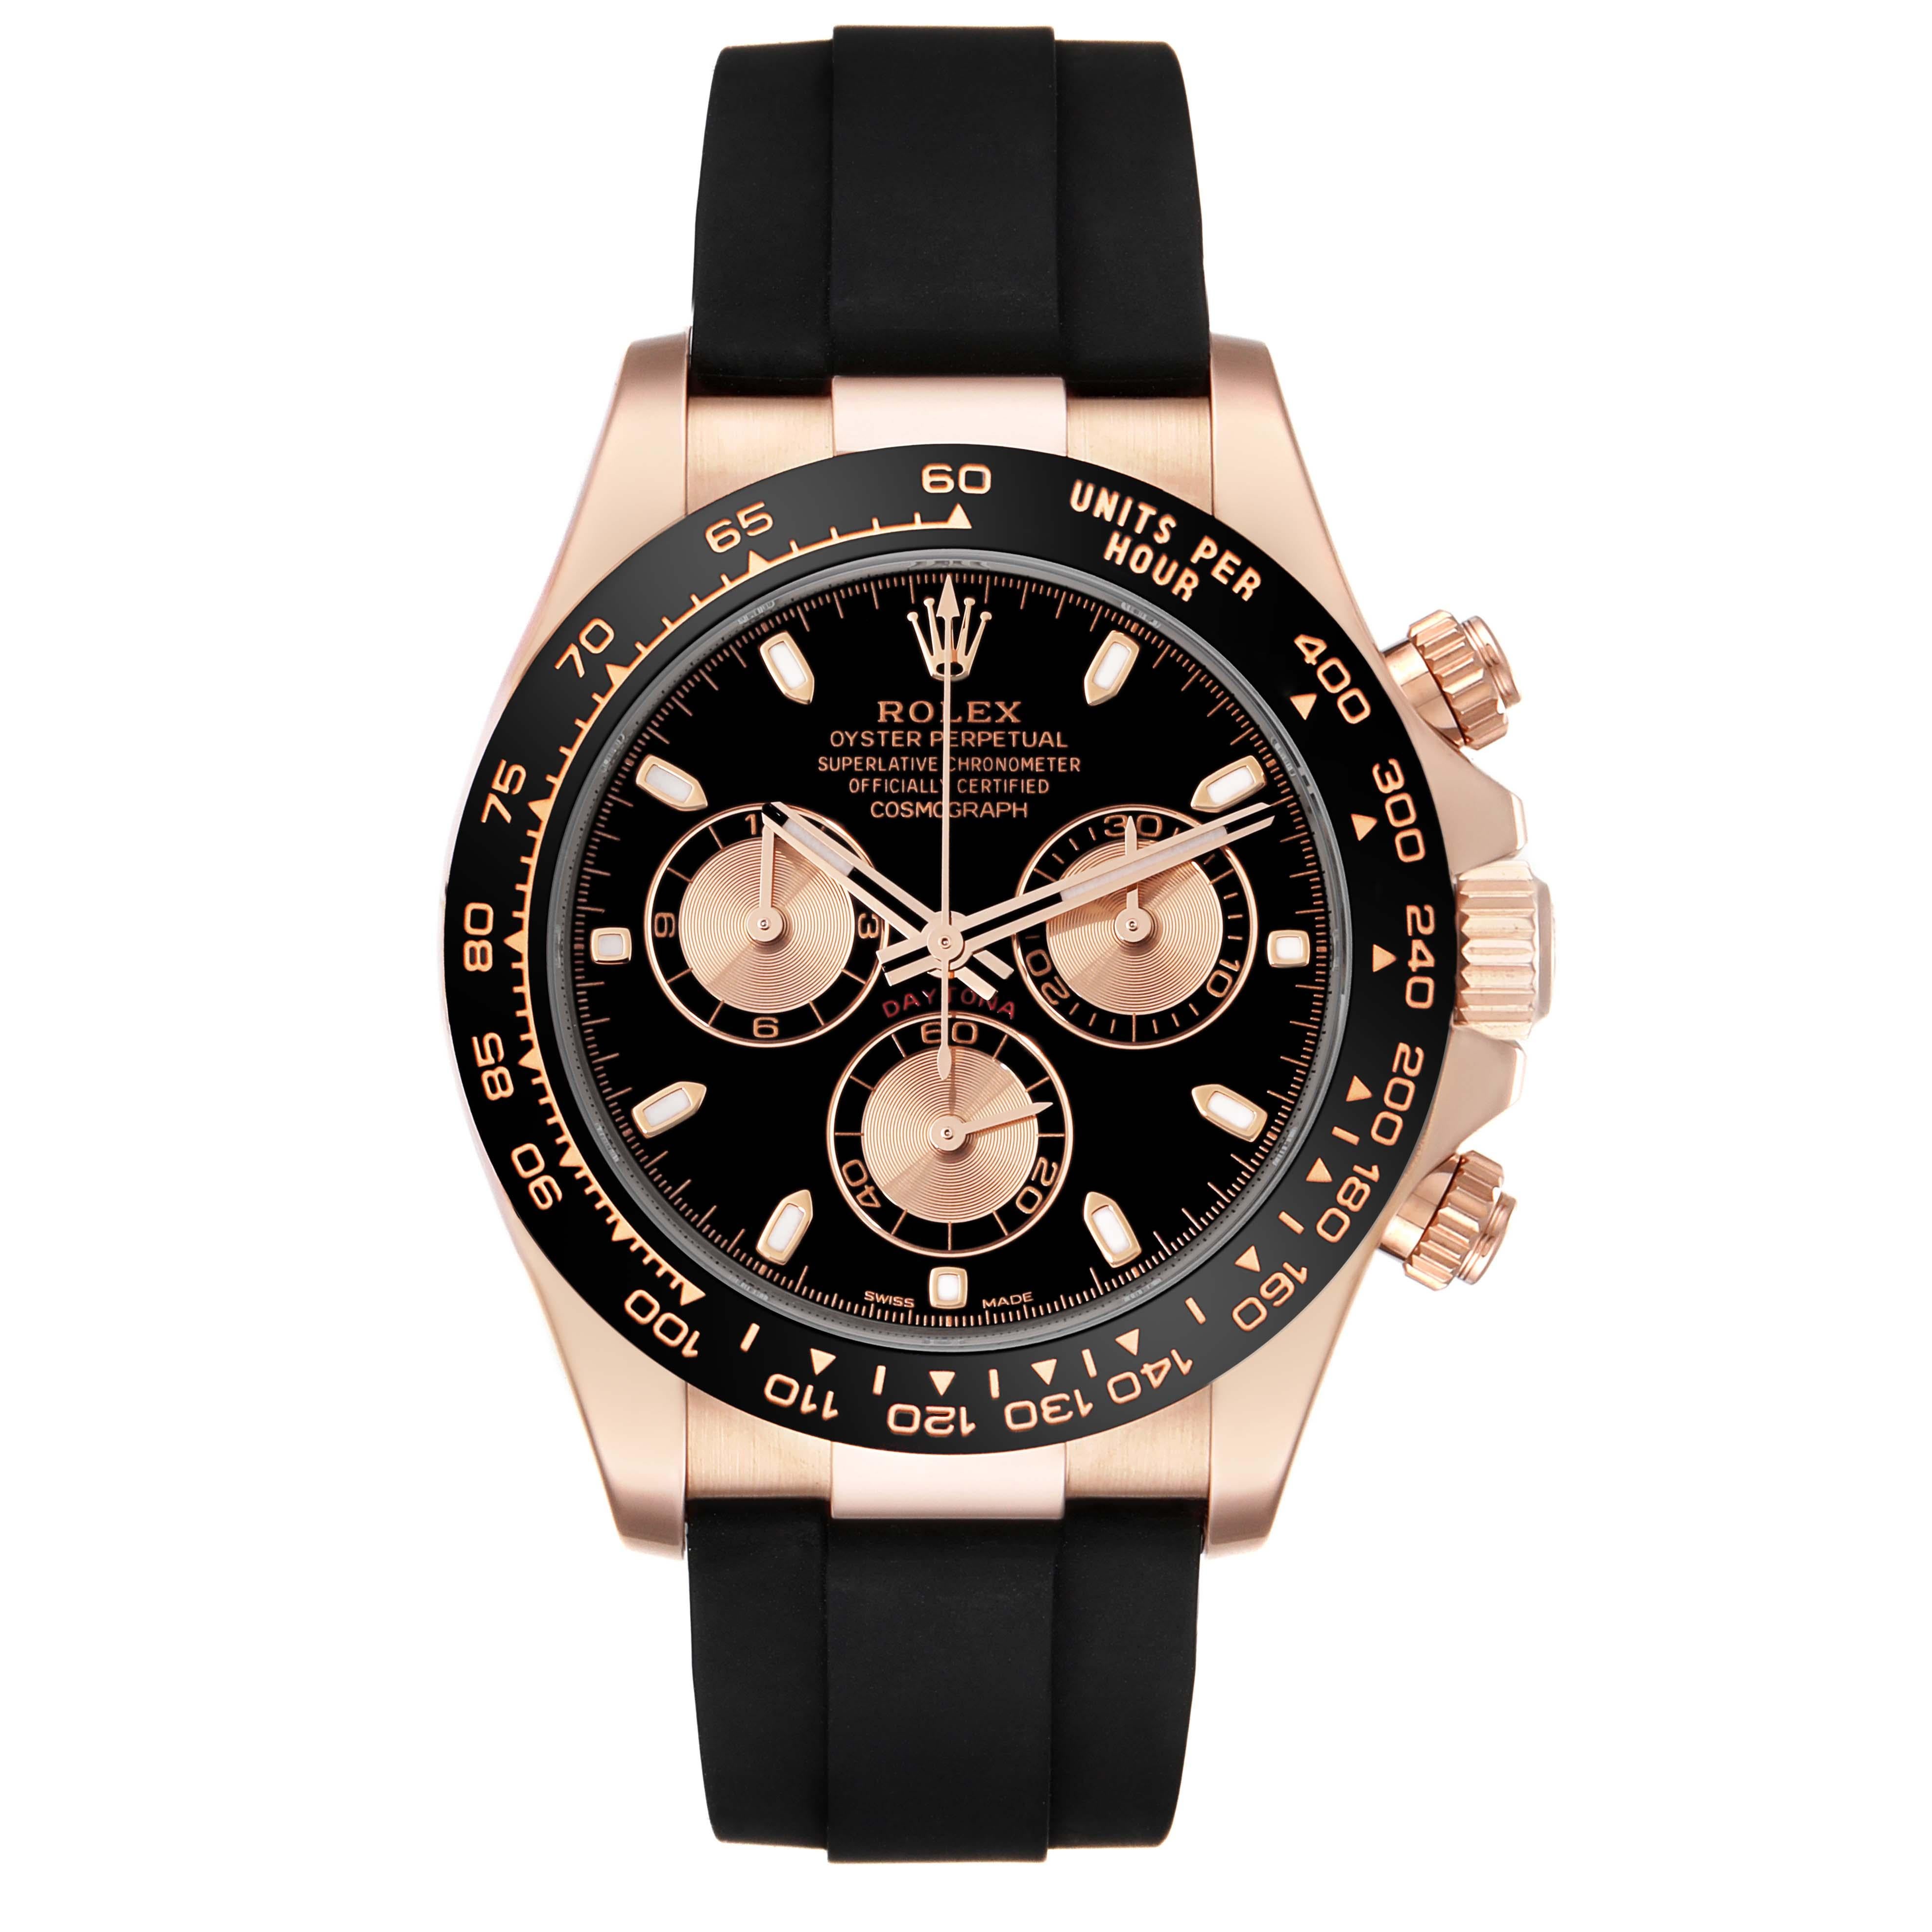 Rolex Cosmograph Daytona Oysterflex Rose Gold Mens Watch 116515 Box Card. Officially certified chronometer self-winding movement. 18K rose gold case 40.0 mm in diameter. Special screw-down push buttons. Screw-down case back. Chronograph pushers and